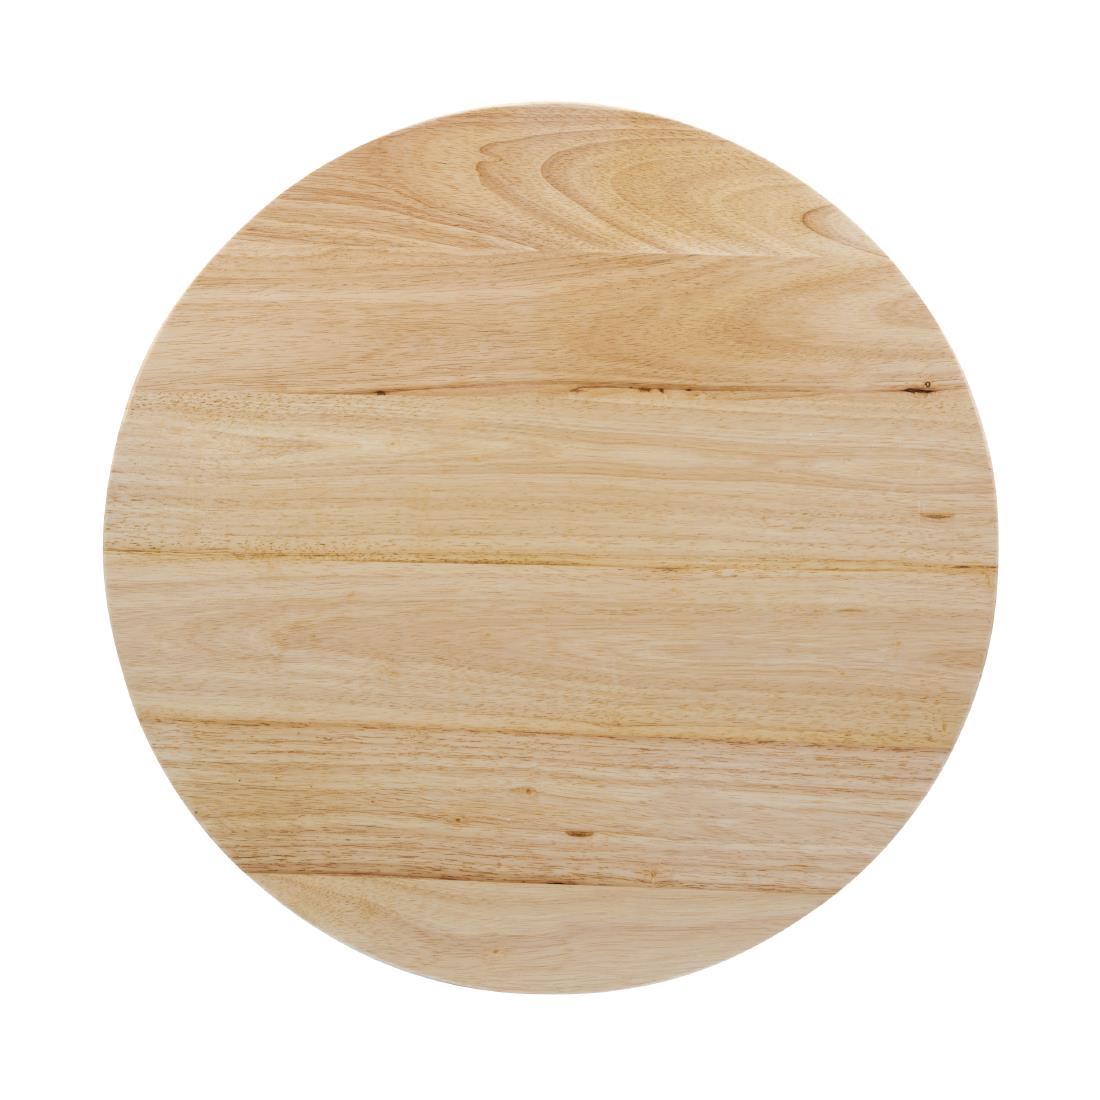 Bolero Pre-drilled Round Table Top Natural 600mm - DY738  - 1